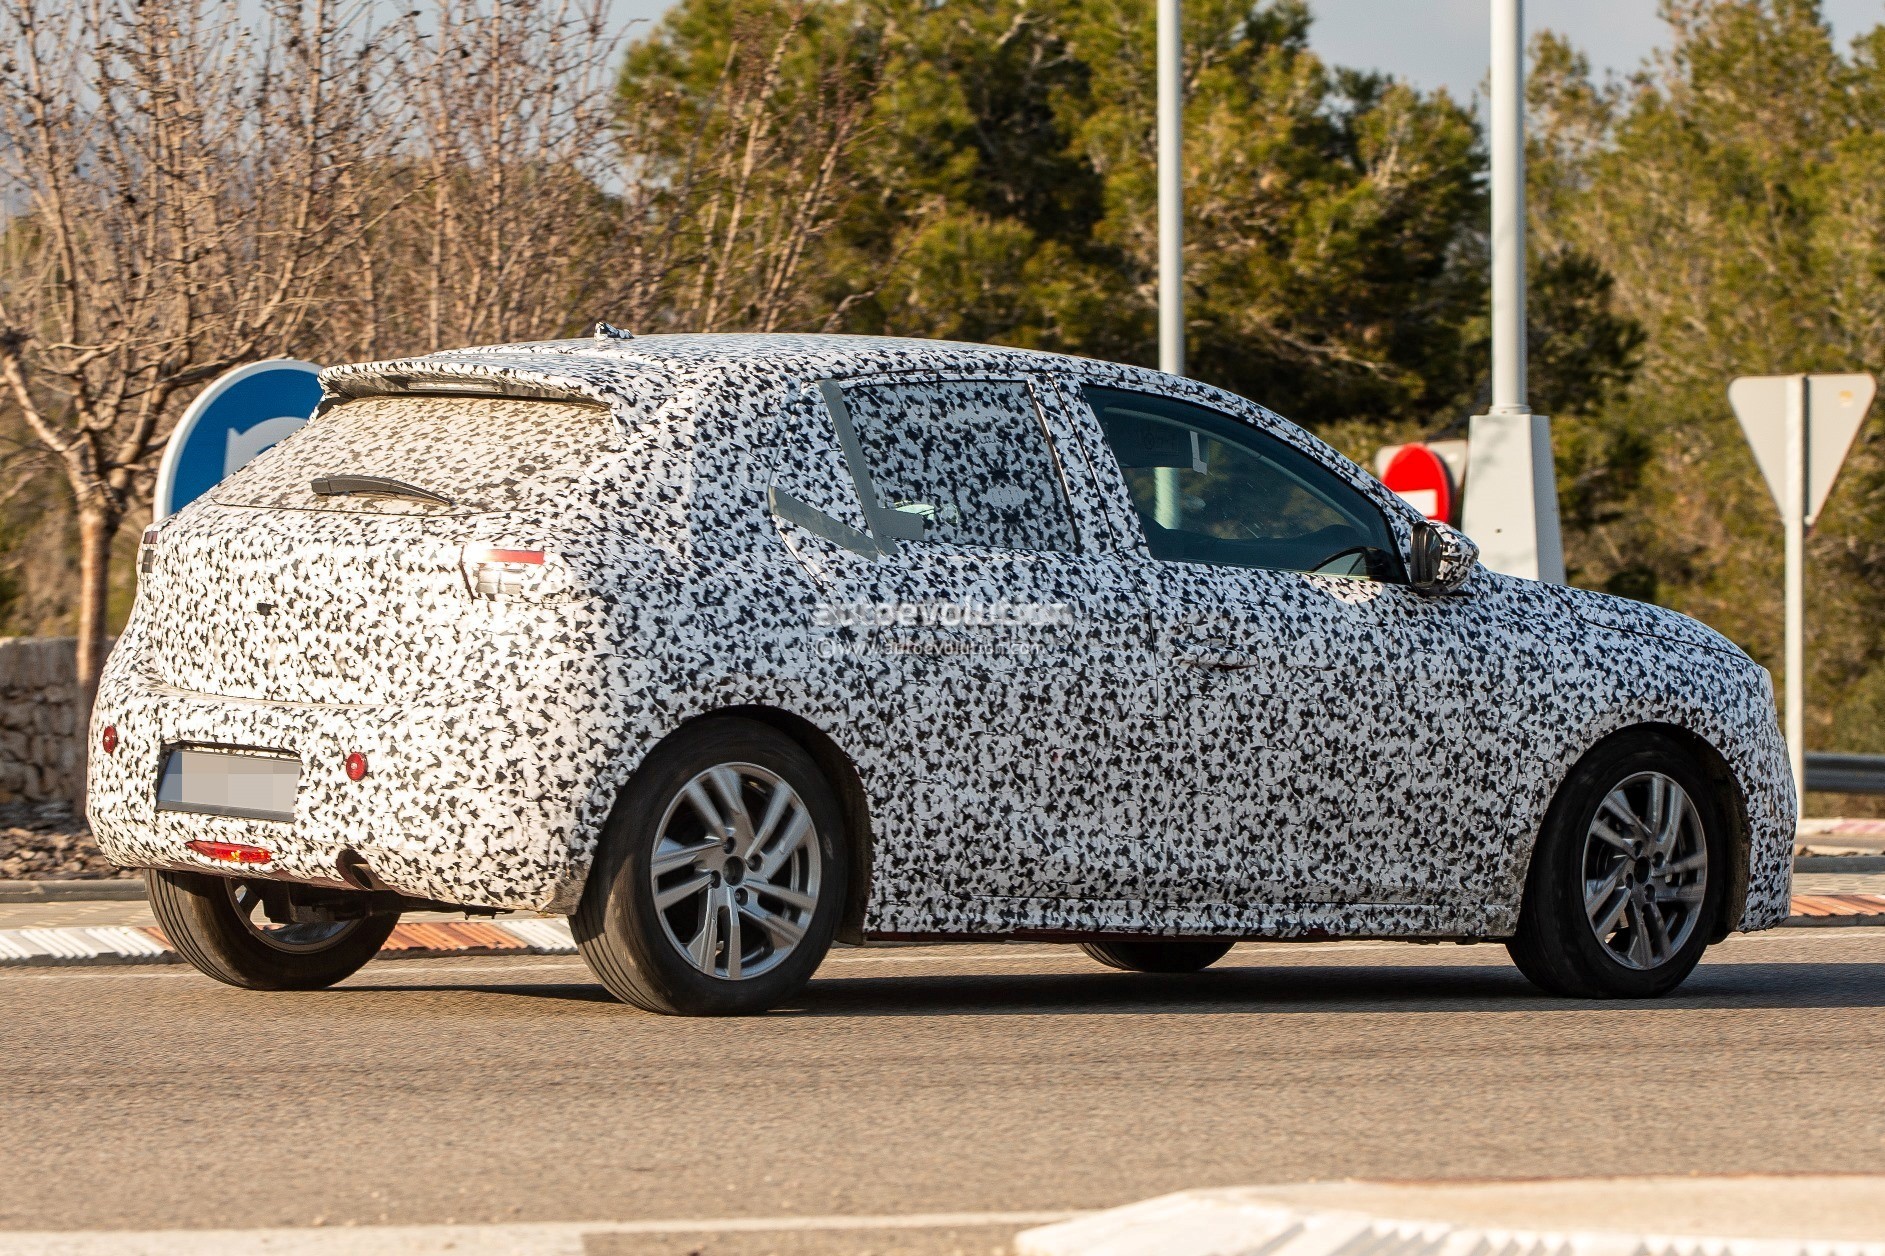 2020 Opel Corsa F Spied, Looks Different From All-New Peugeot 208 -  autoevolution